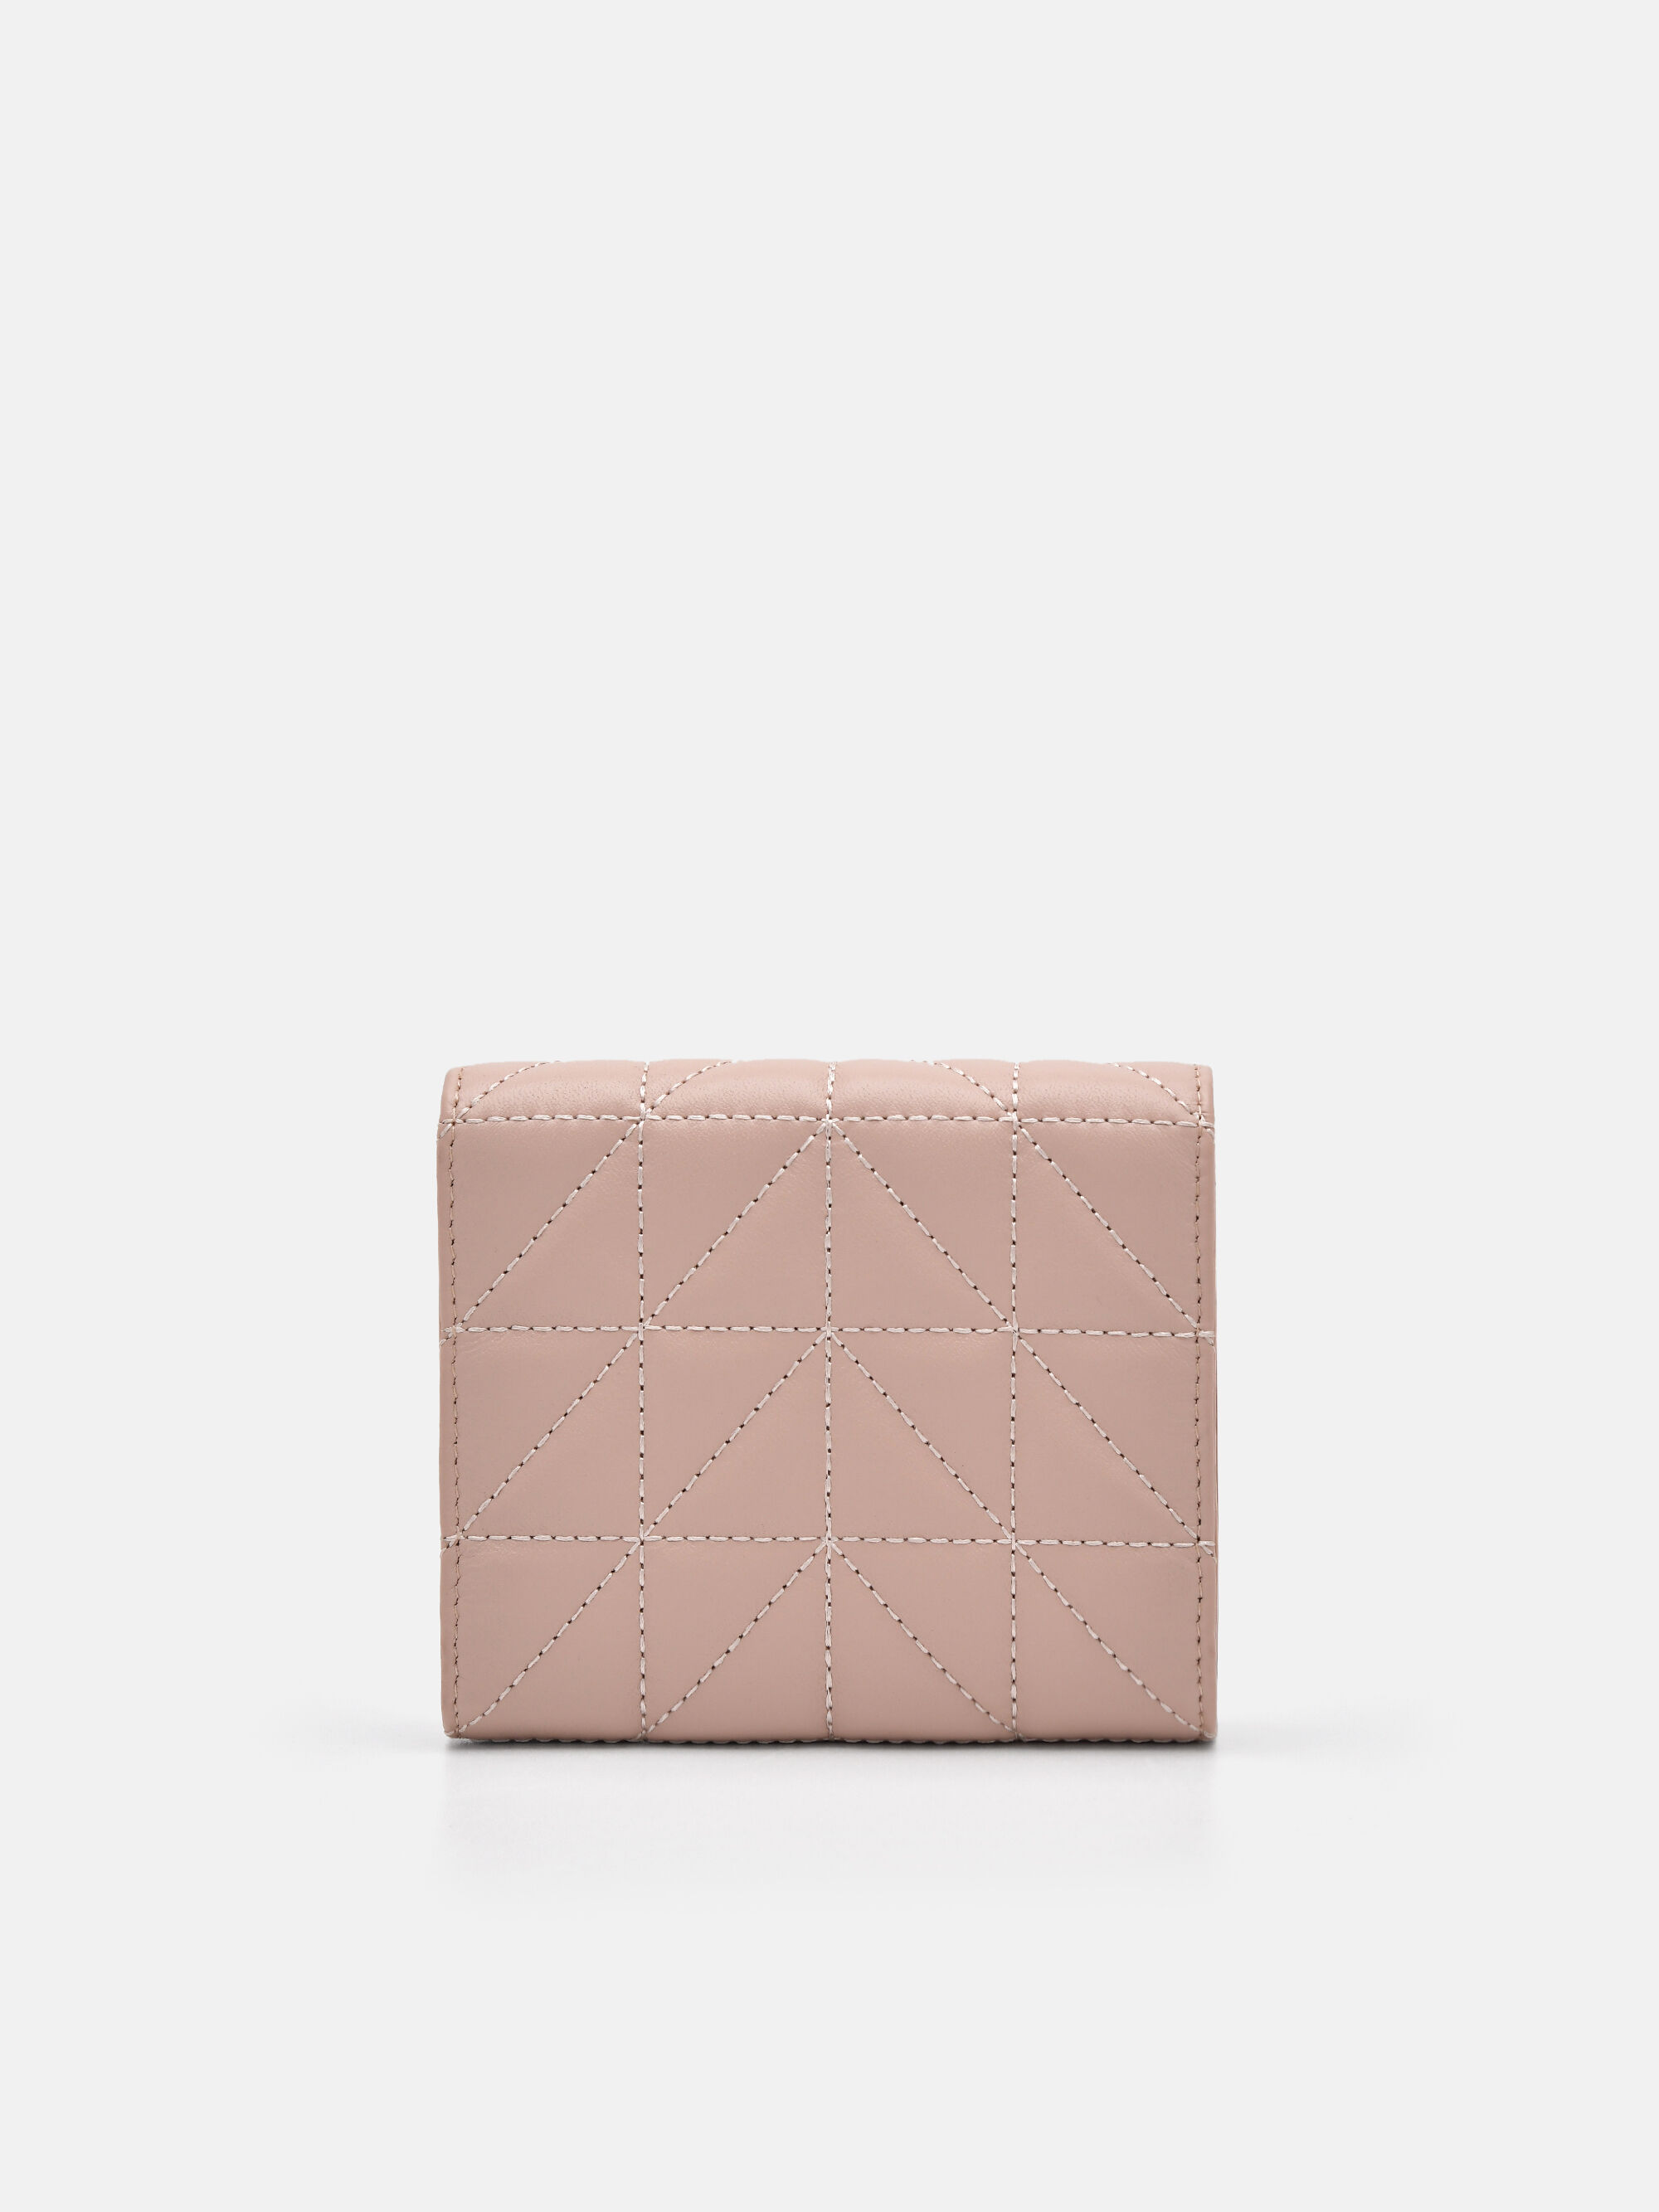 PEDRO Icon Leather Tri-Fold Wallet in Pixel, Nude